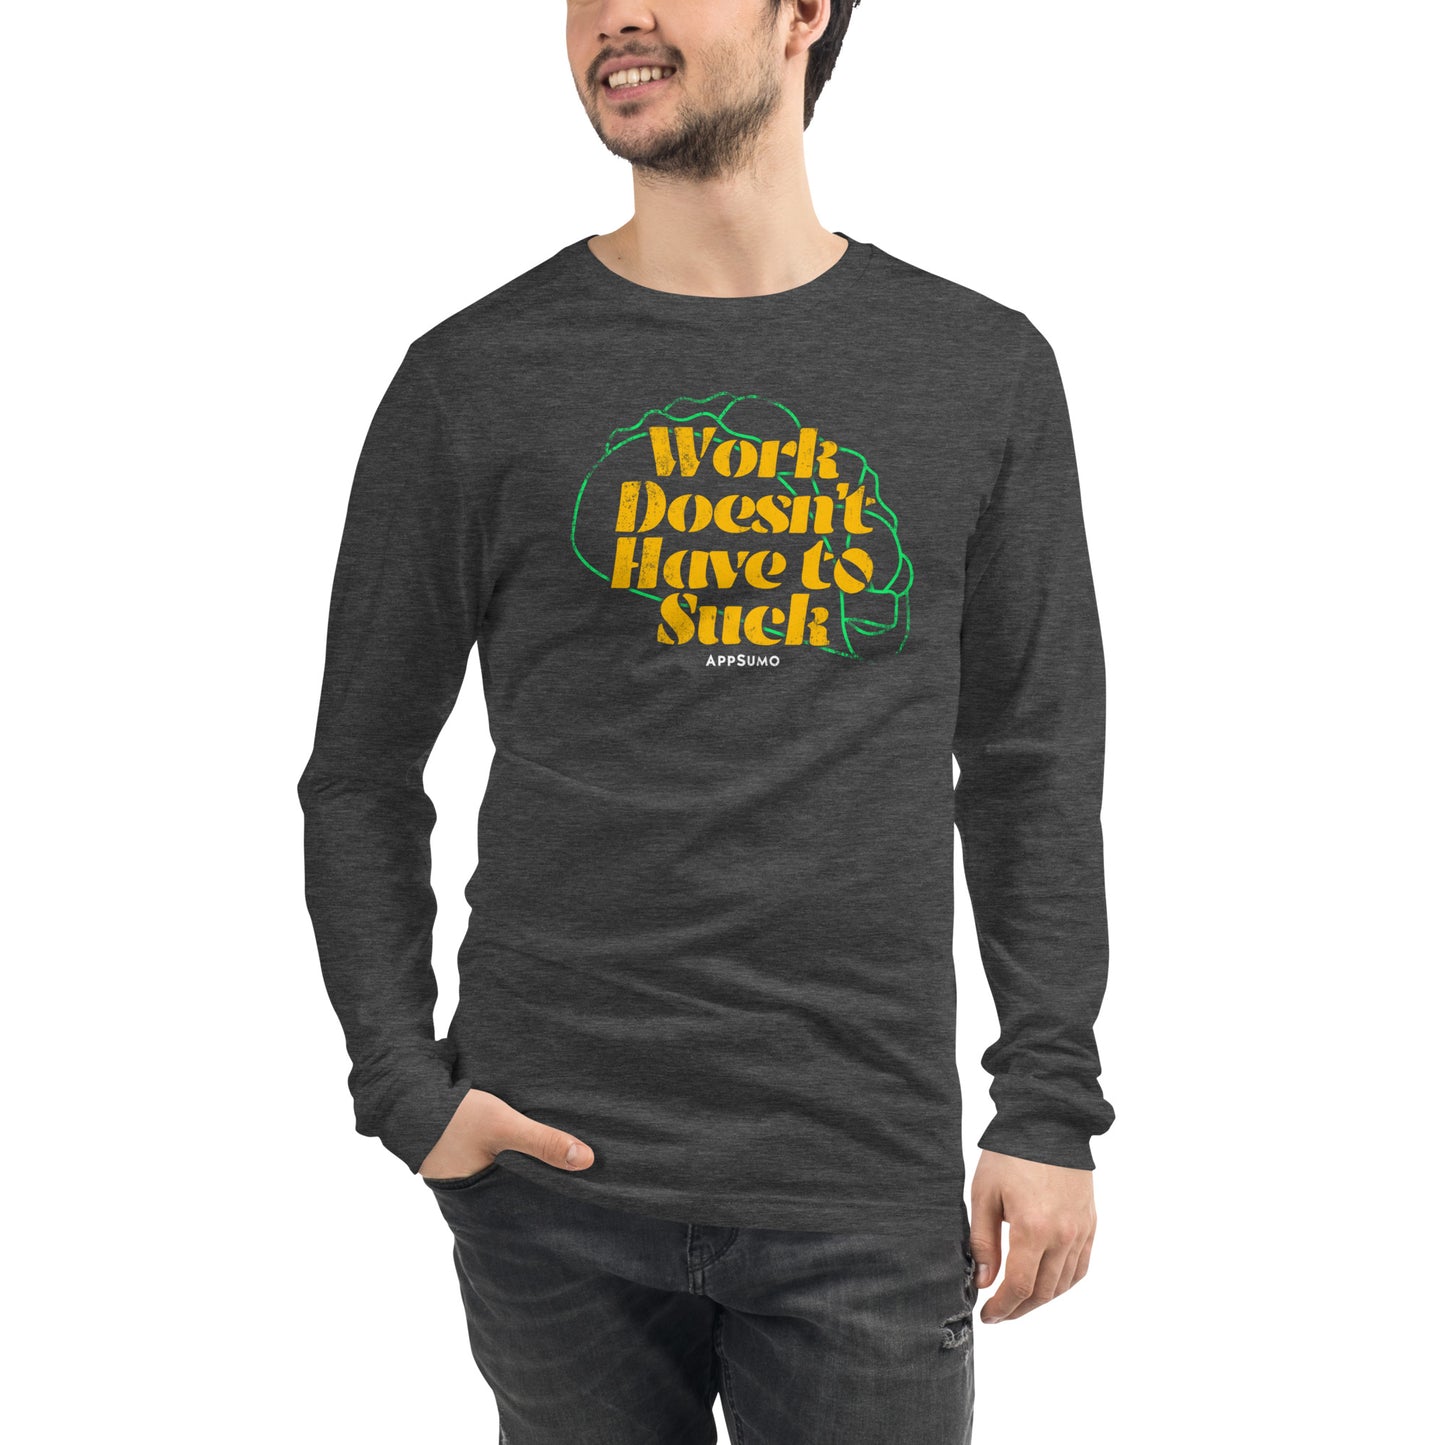 Work Doesn't Have to Suck - Unisex Long Sleeve Tee